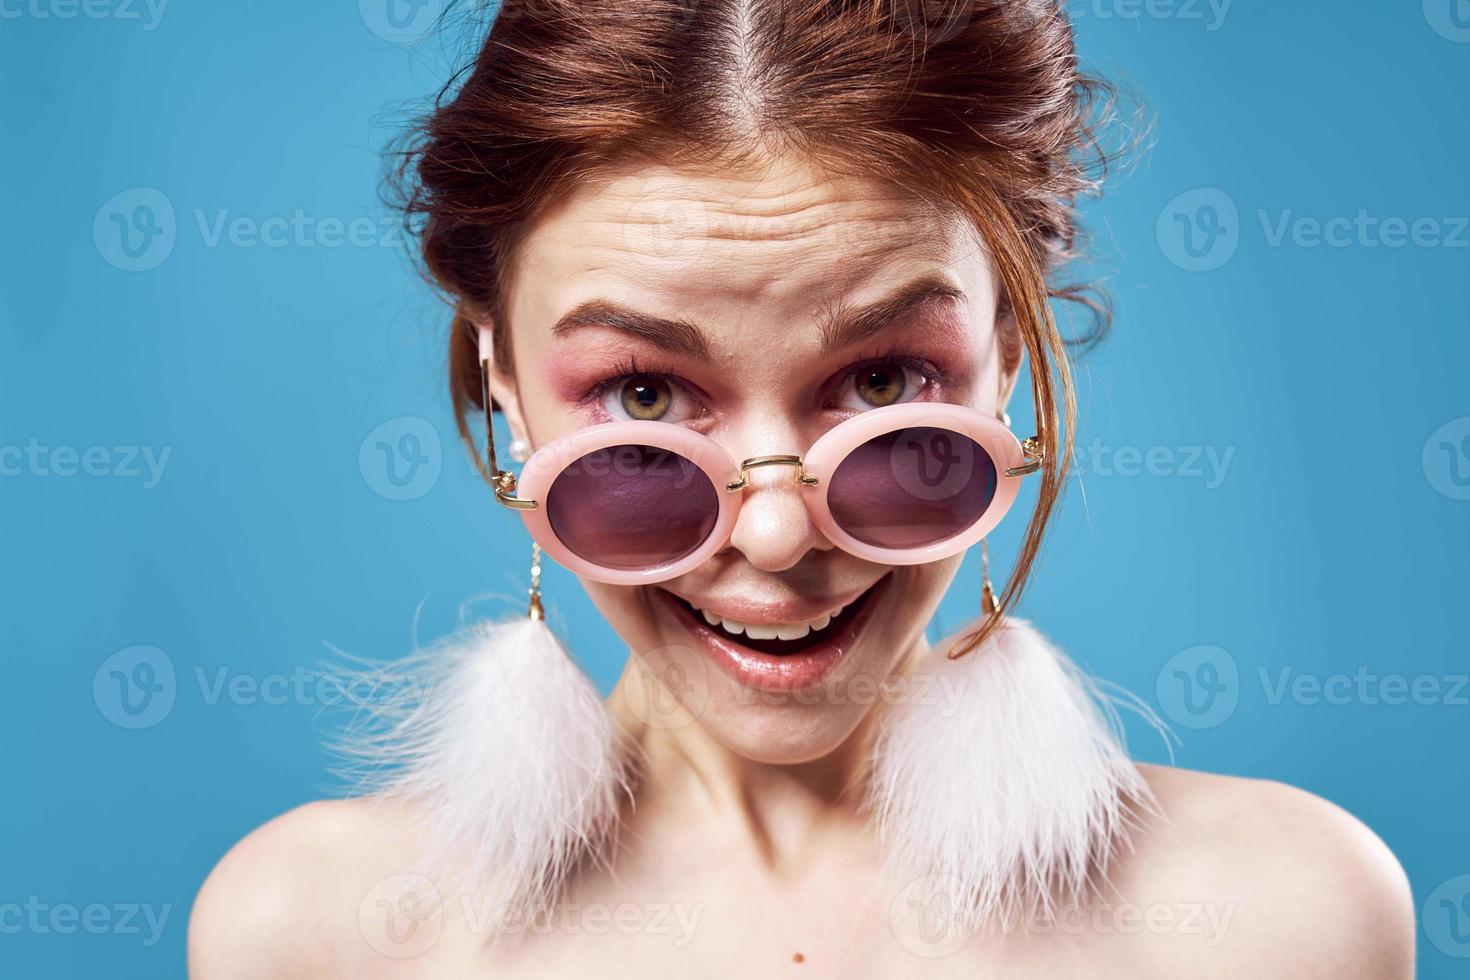 emotional woman wearing sunglasses fluffy earrings jewelry close-up blue background photo